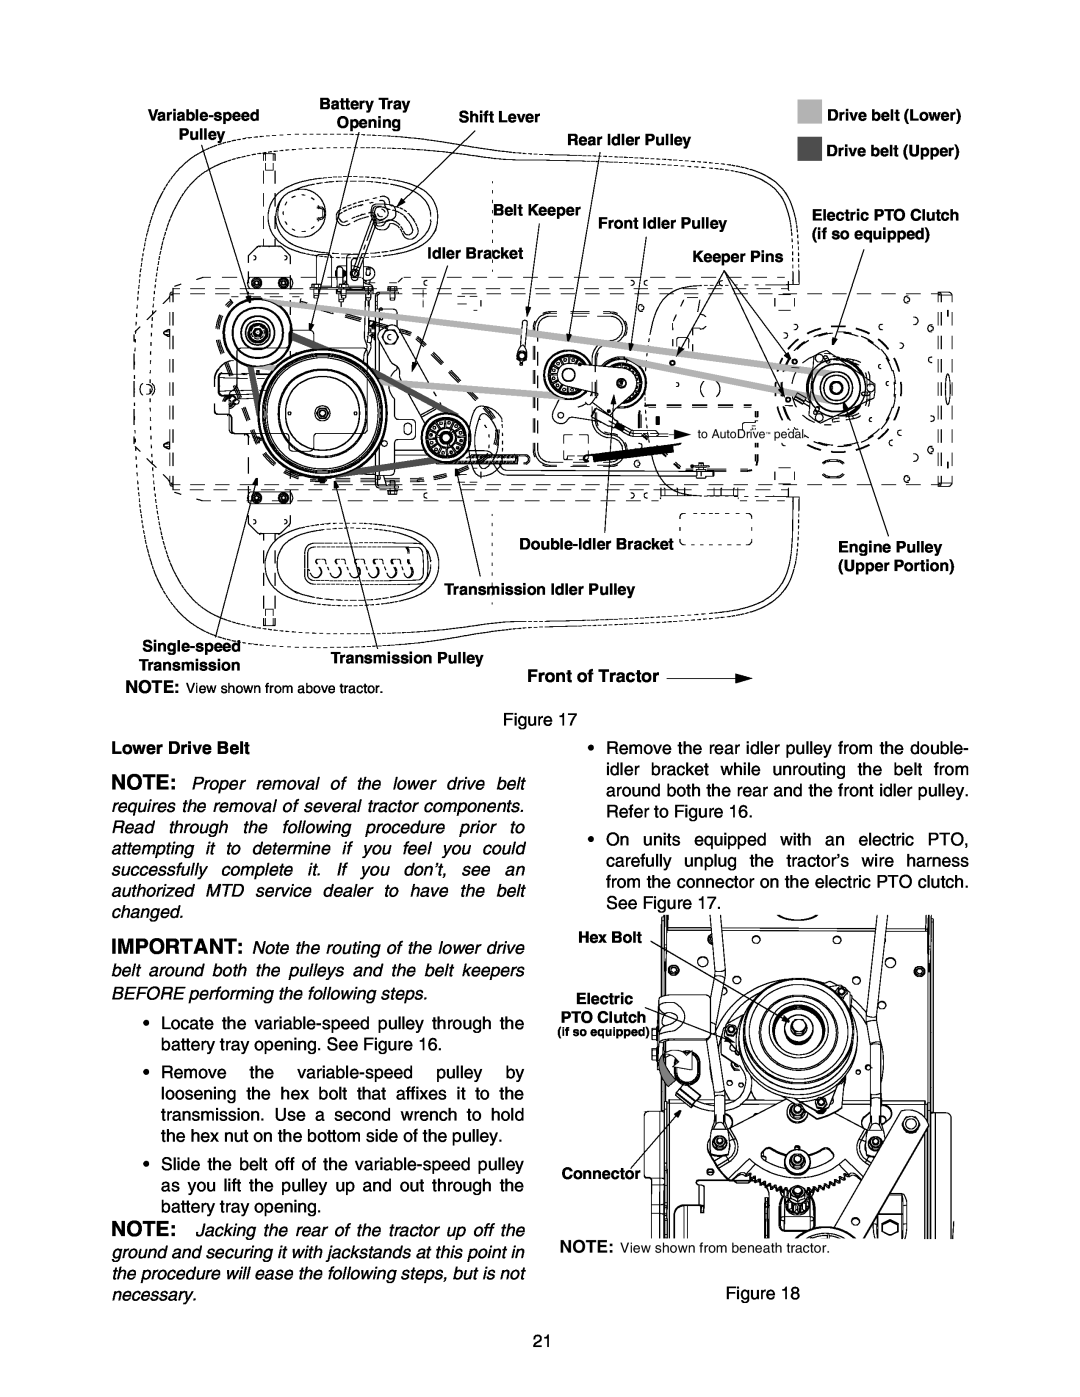 MTD 604 manual Front of Tractor, Lower Drive Belt, Variable-speed, NOTE View shown from above tractor 